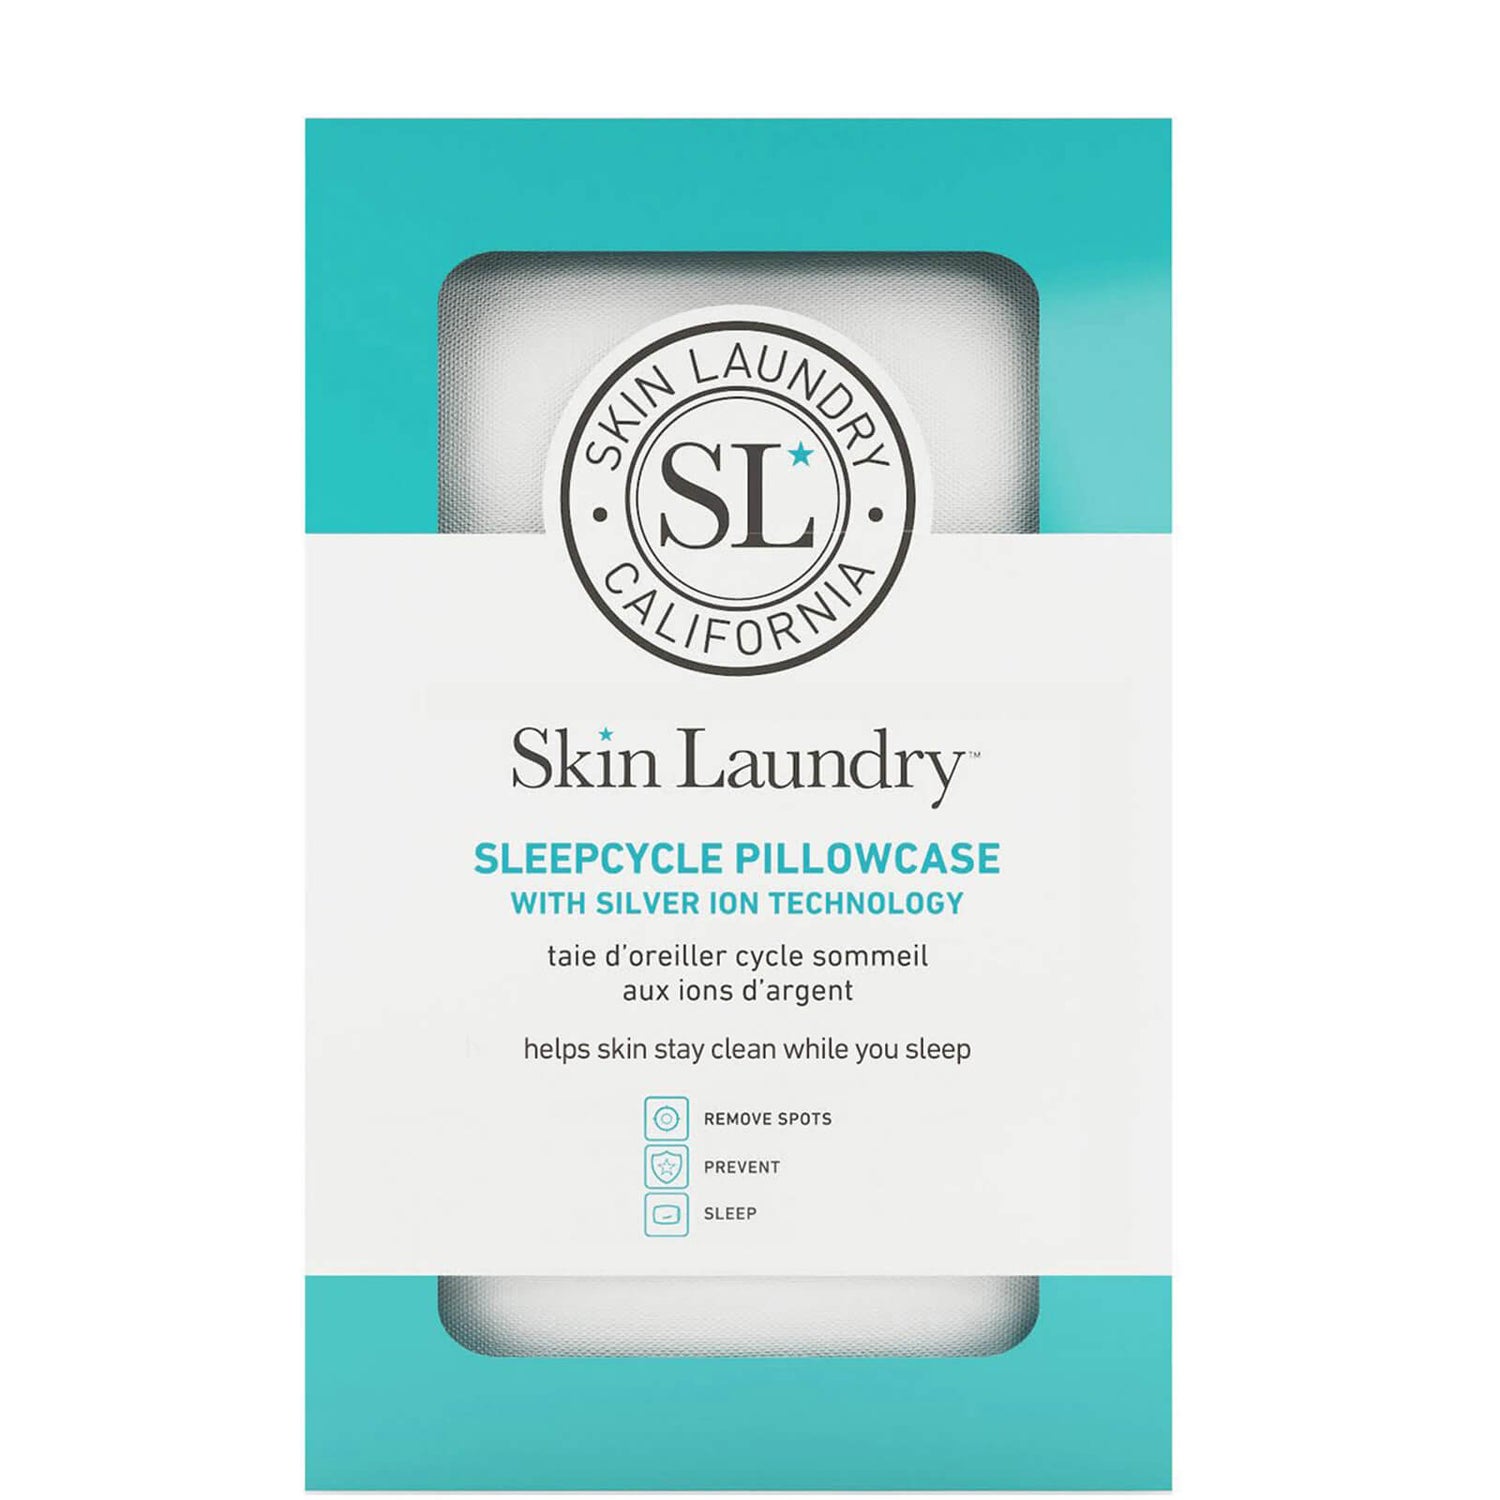 Skin Laundry SLEEPCYCLE PILLOWCASE with Silver Ion Technology